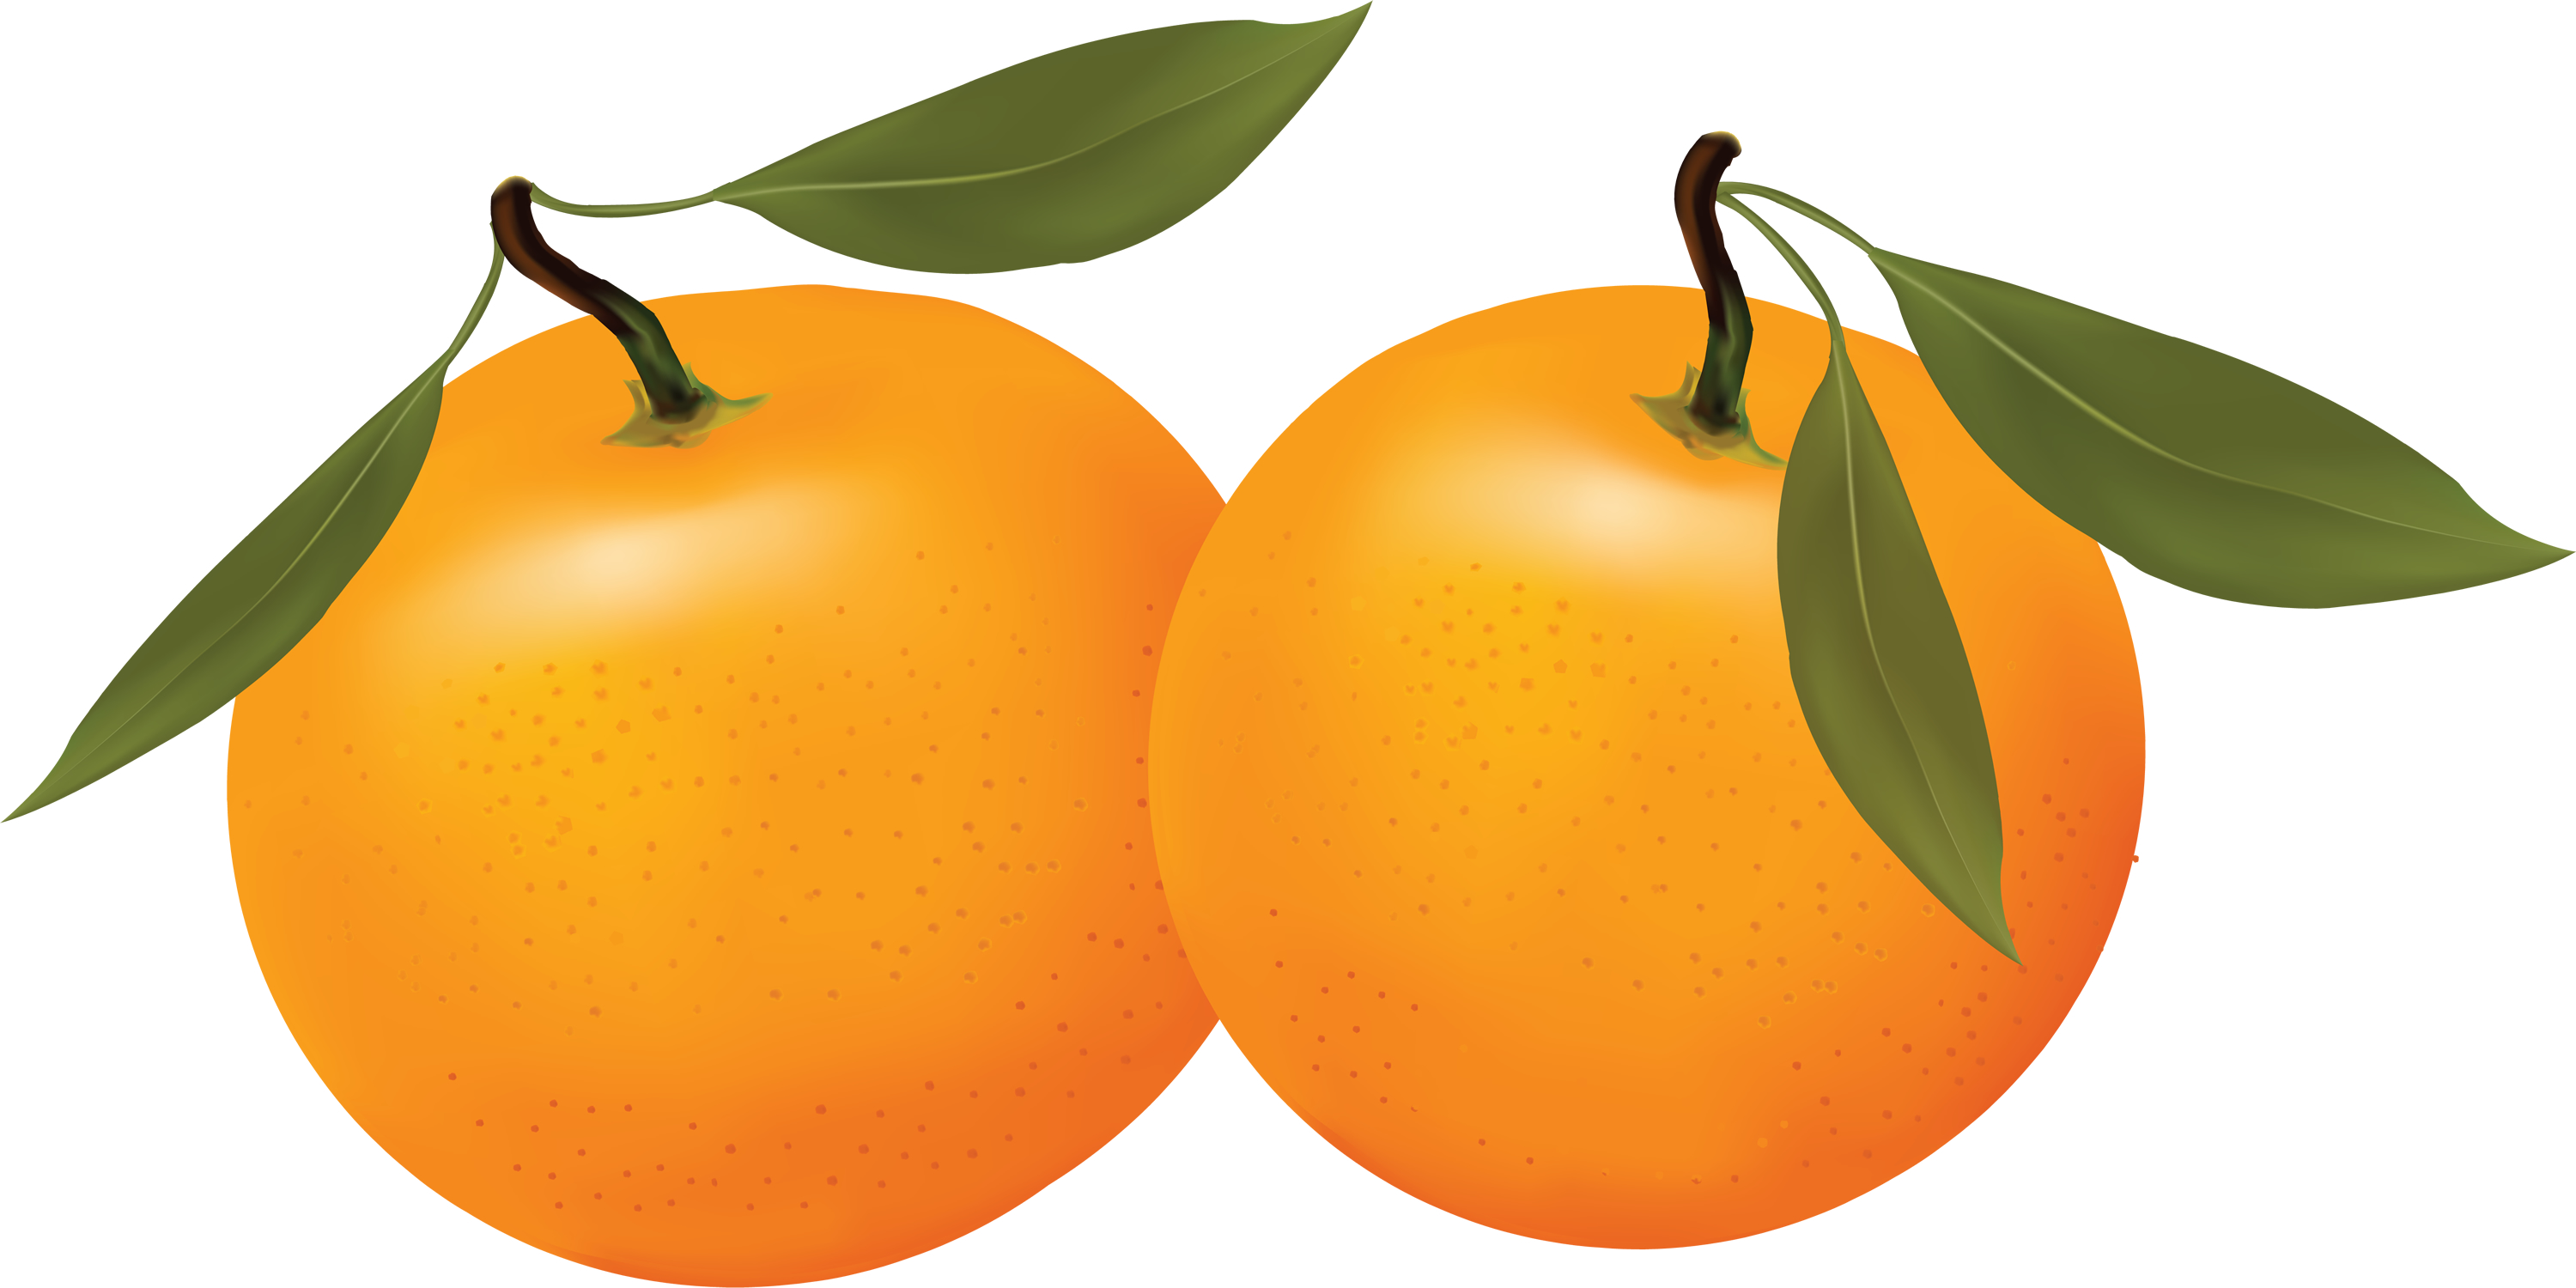 clipart apples and oranges - photo #17